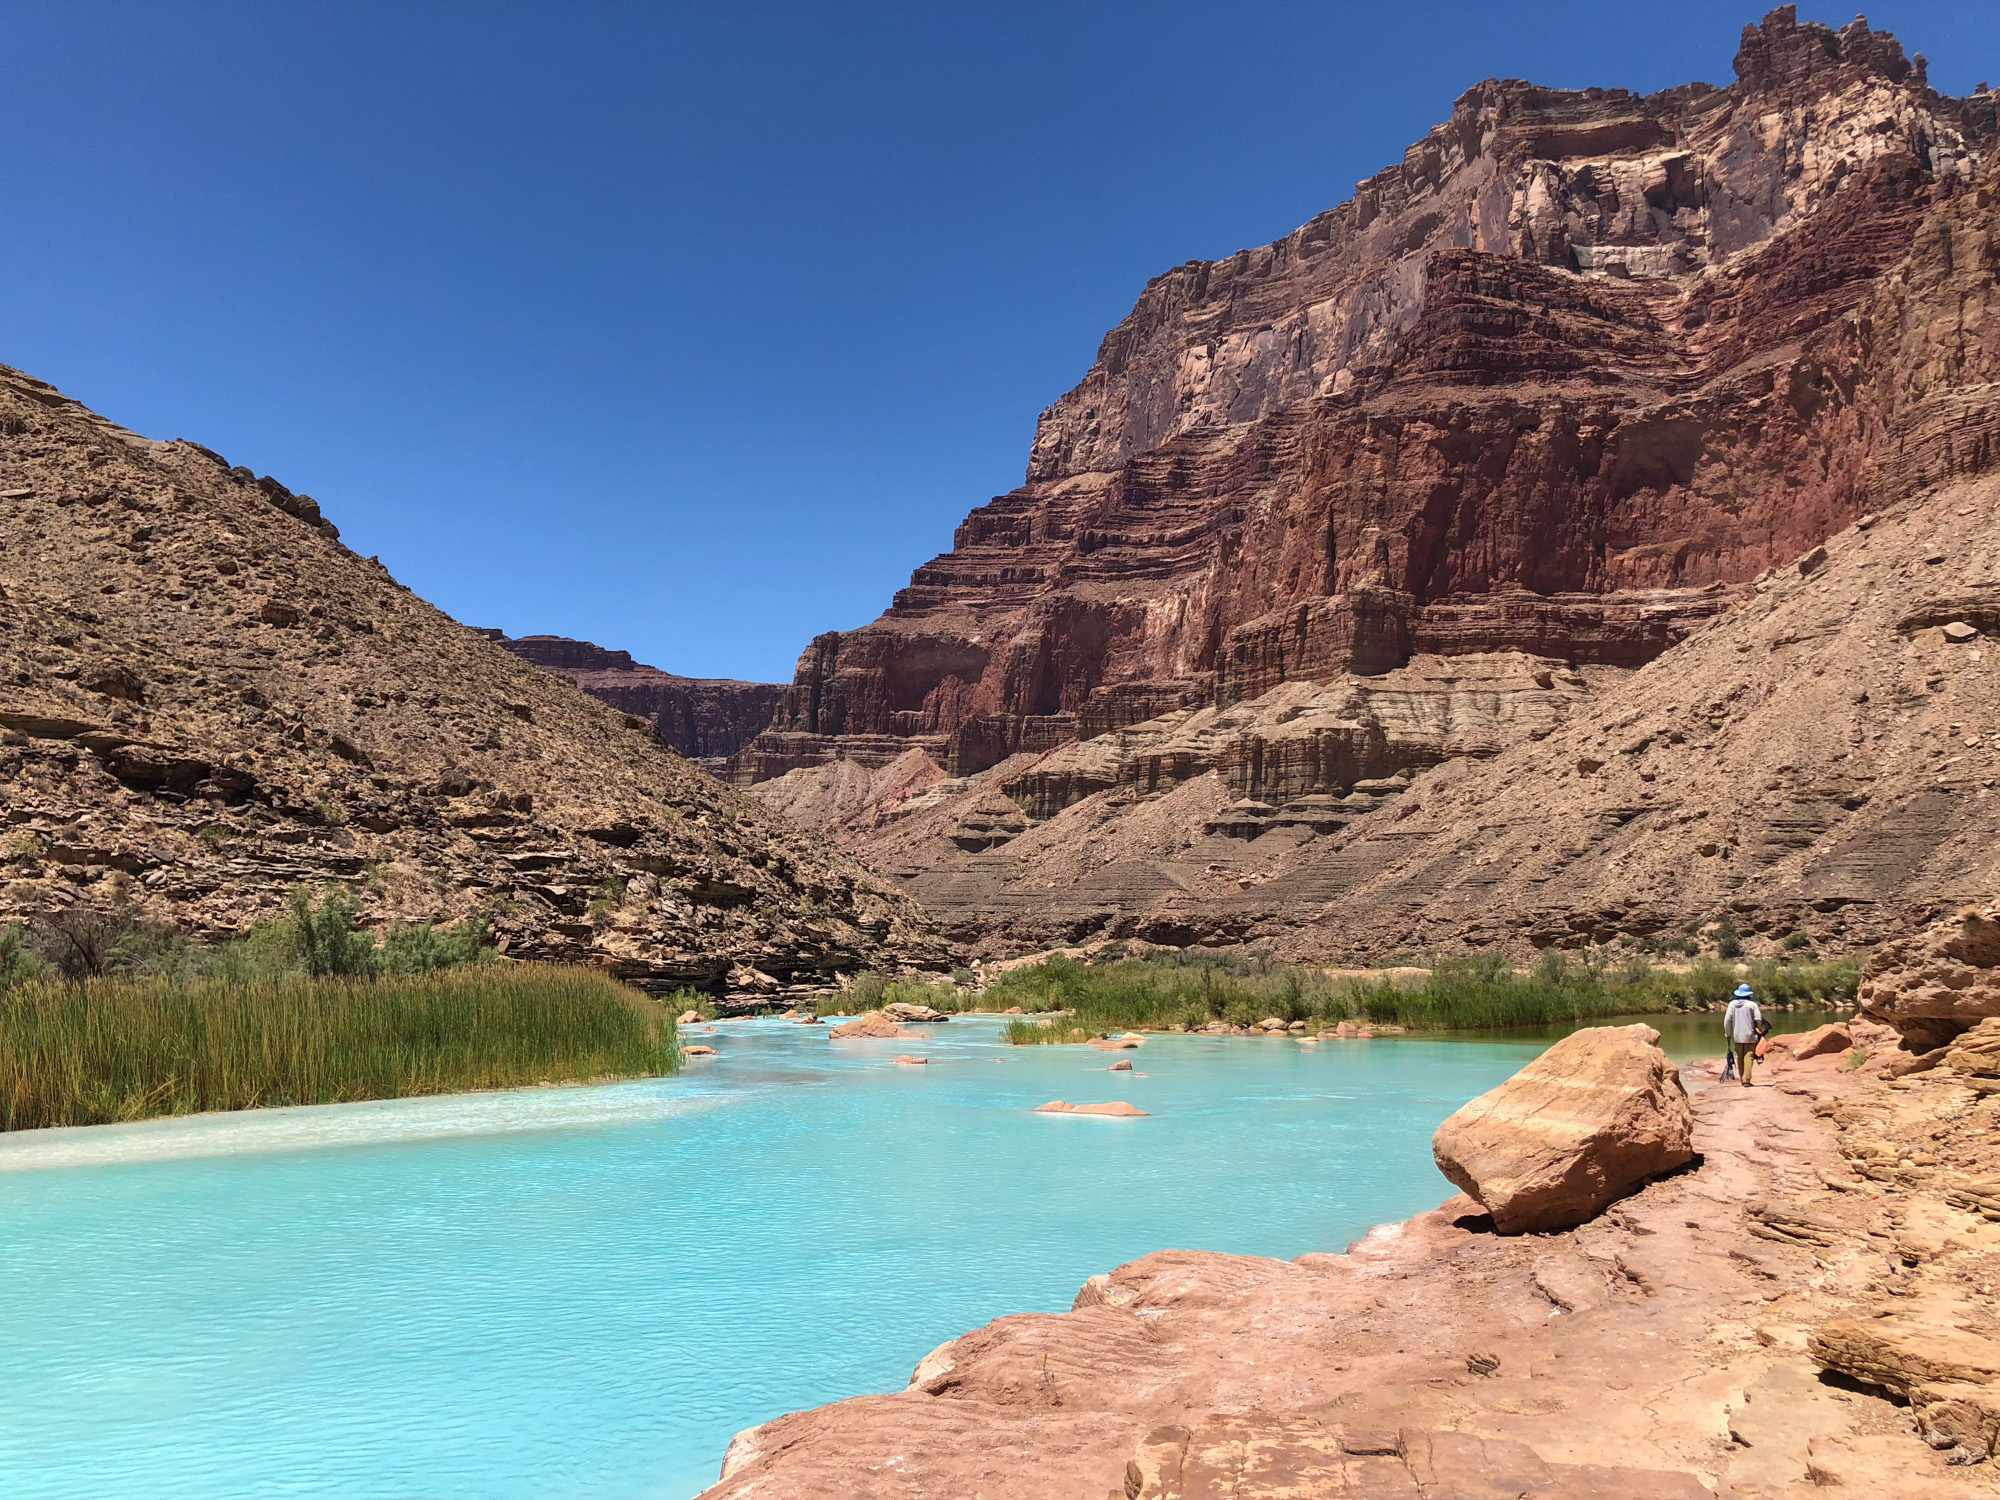  Turquoise blue of the Little Colorado River 